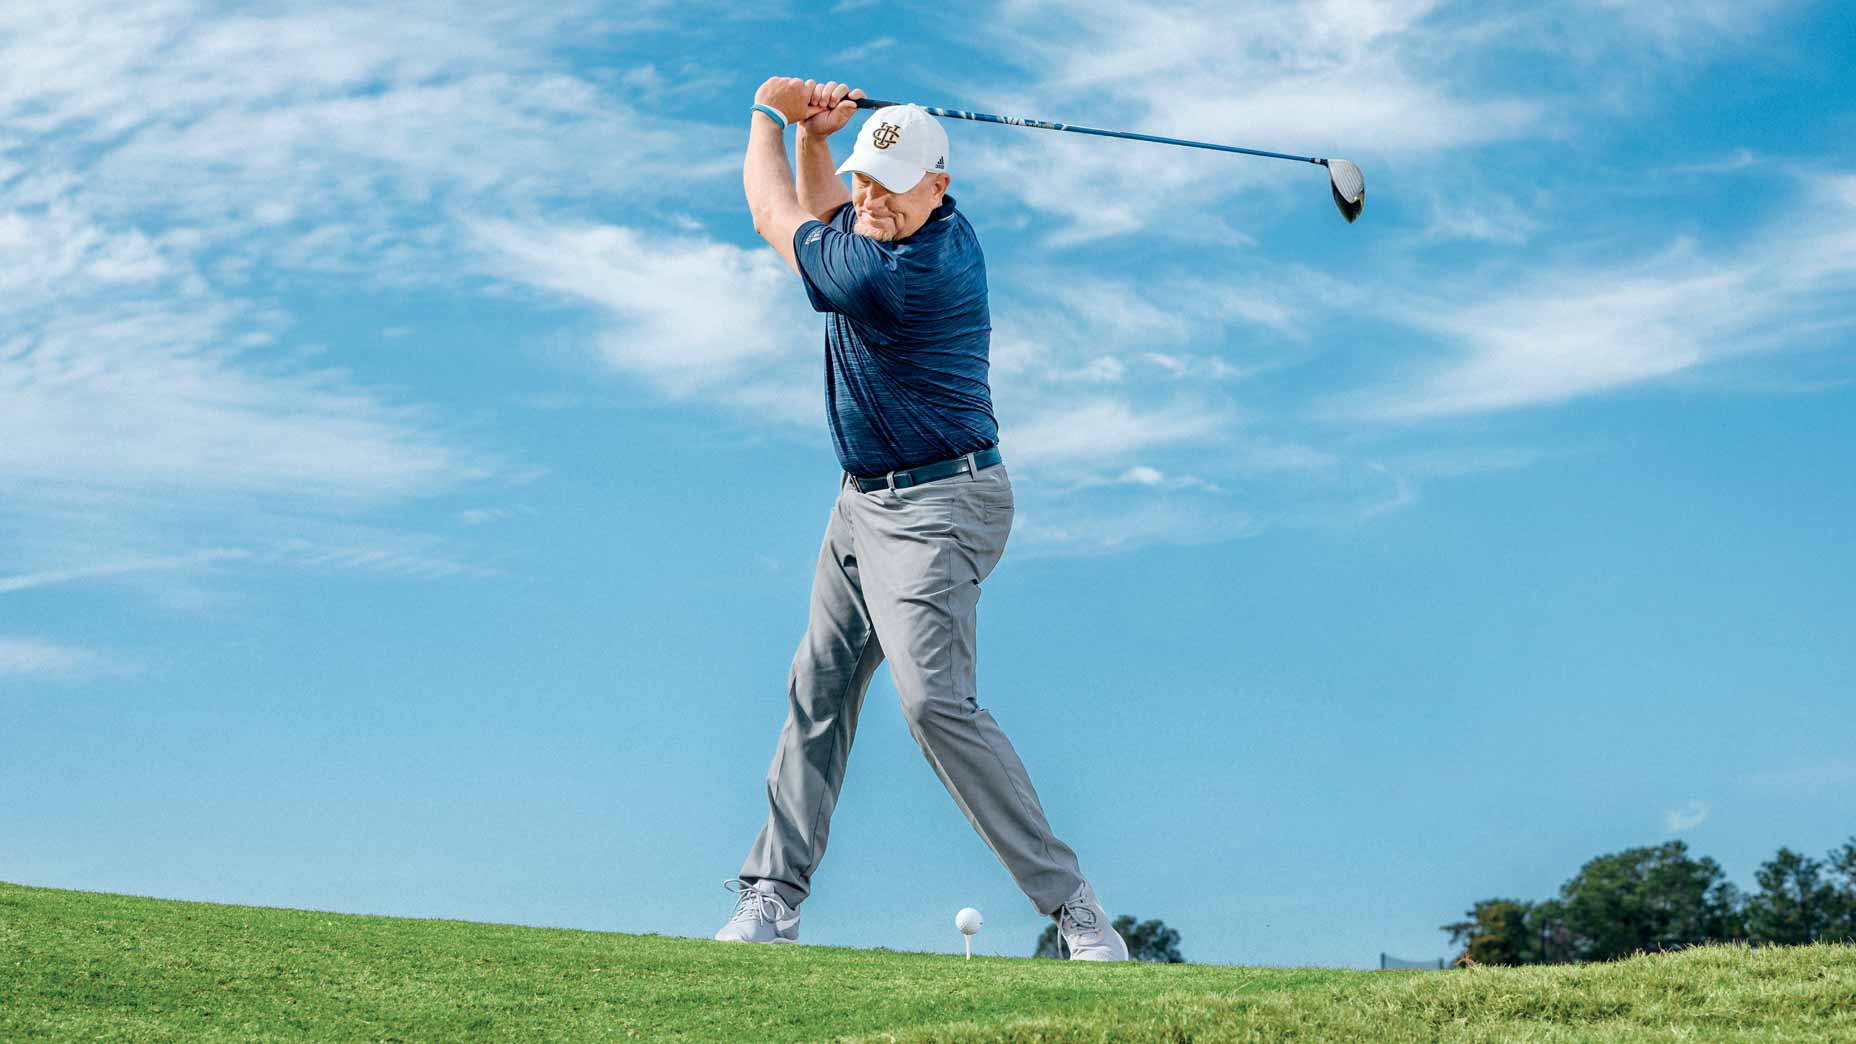 Use this simple move to unlock some serious power in your game